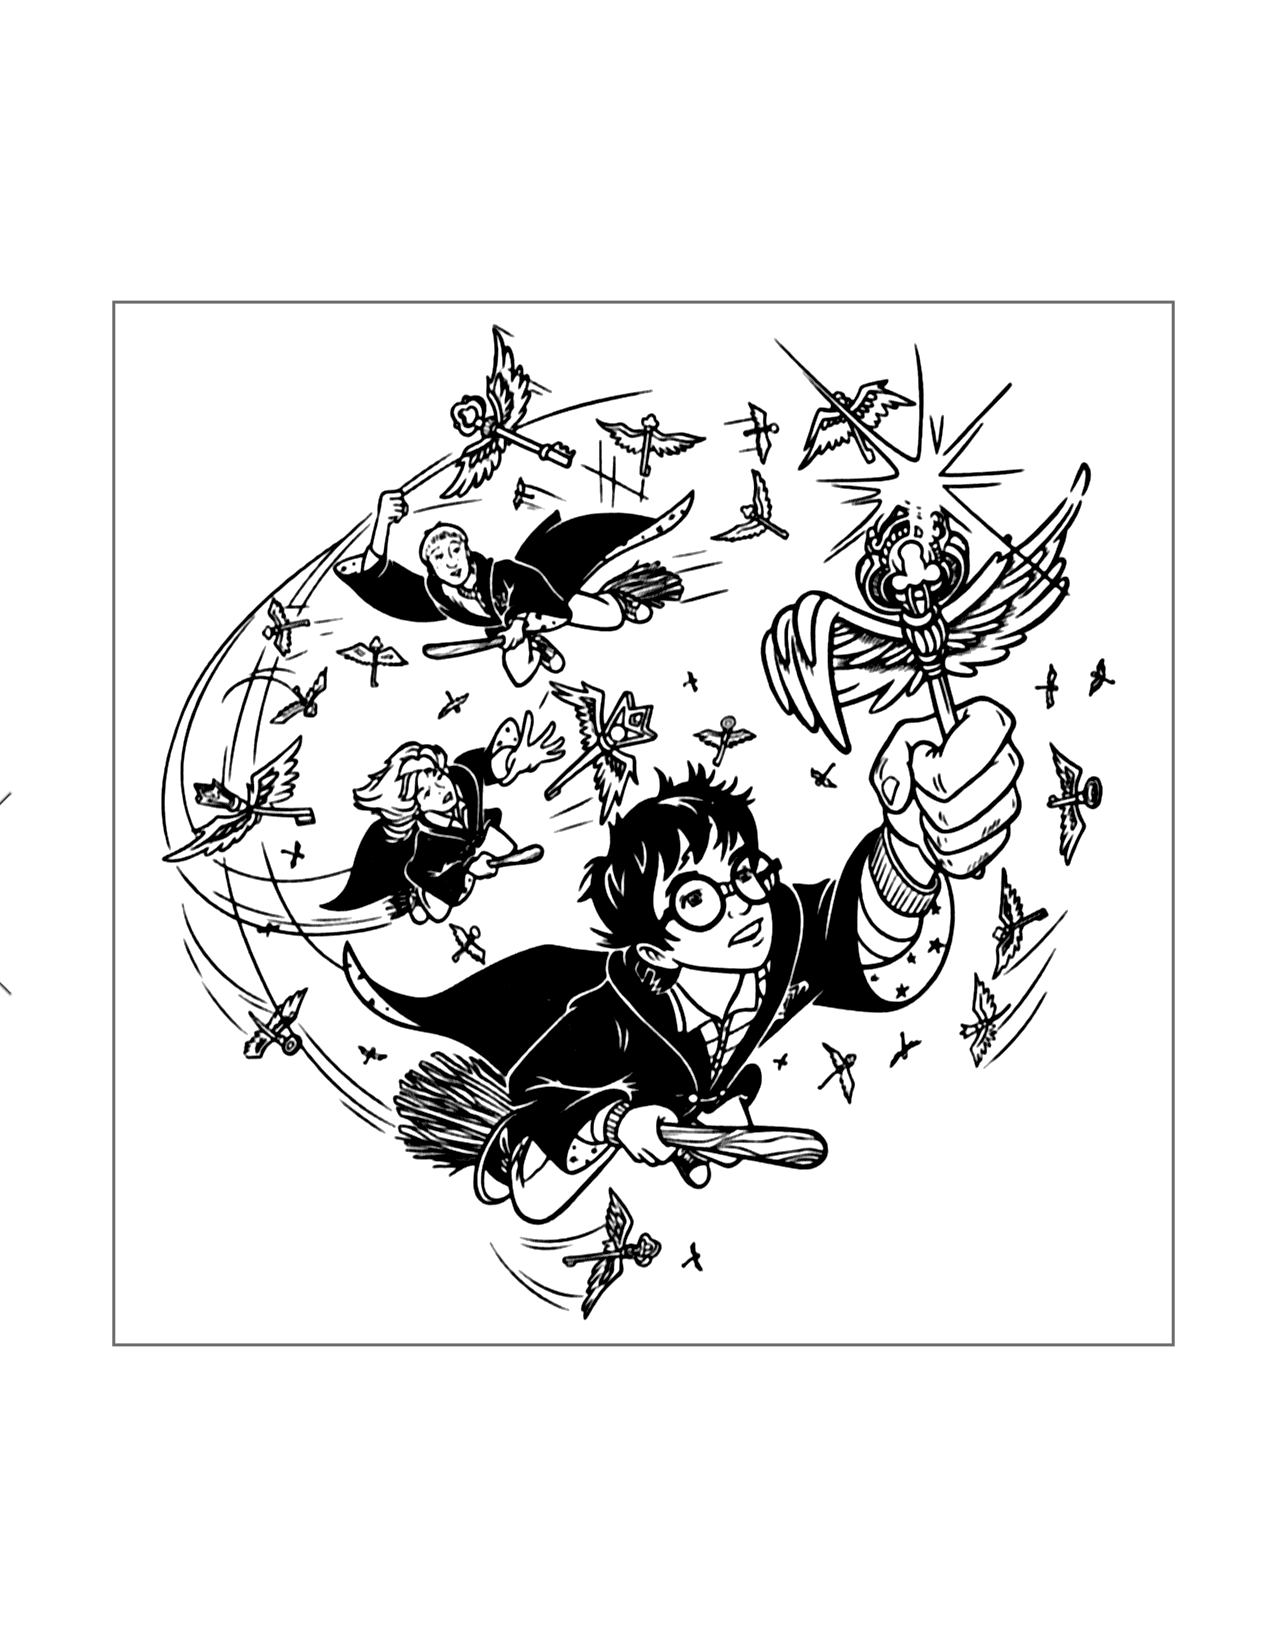 Harry Potter Quidditch Coloring Page